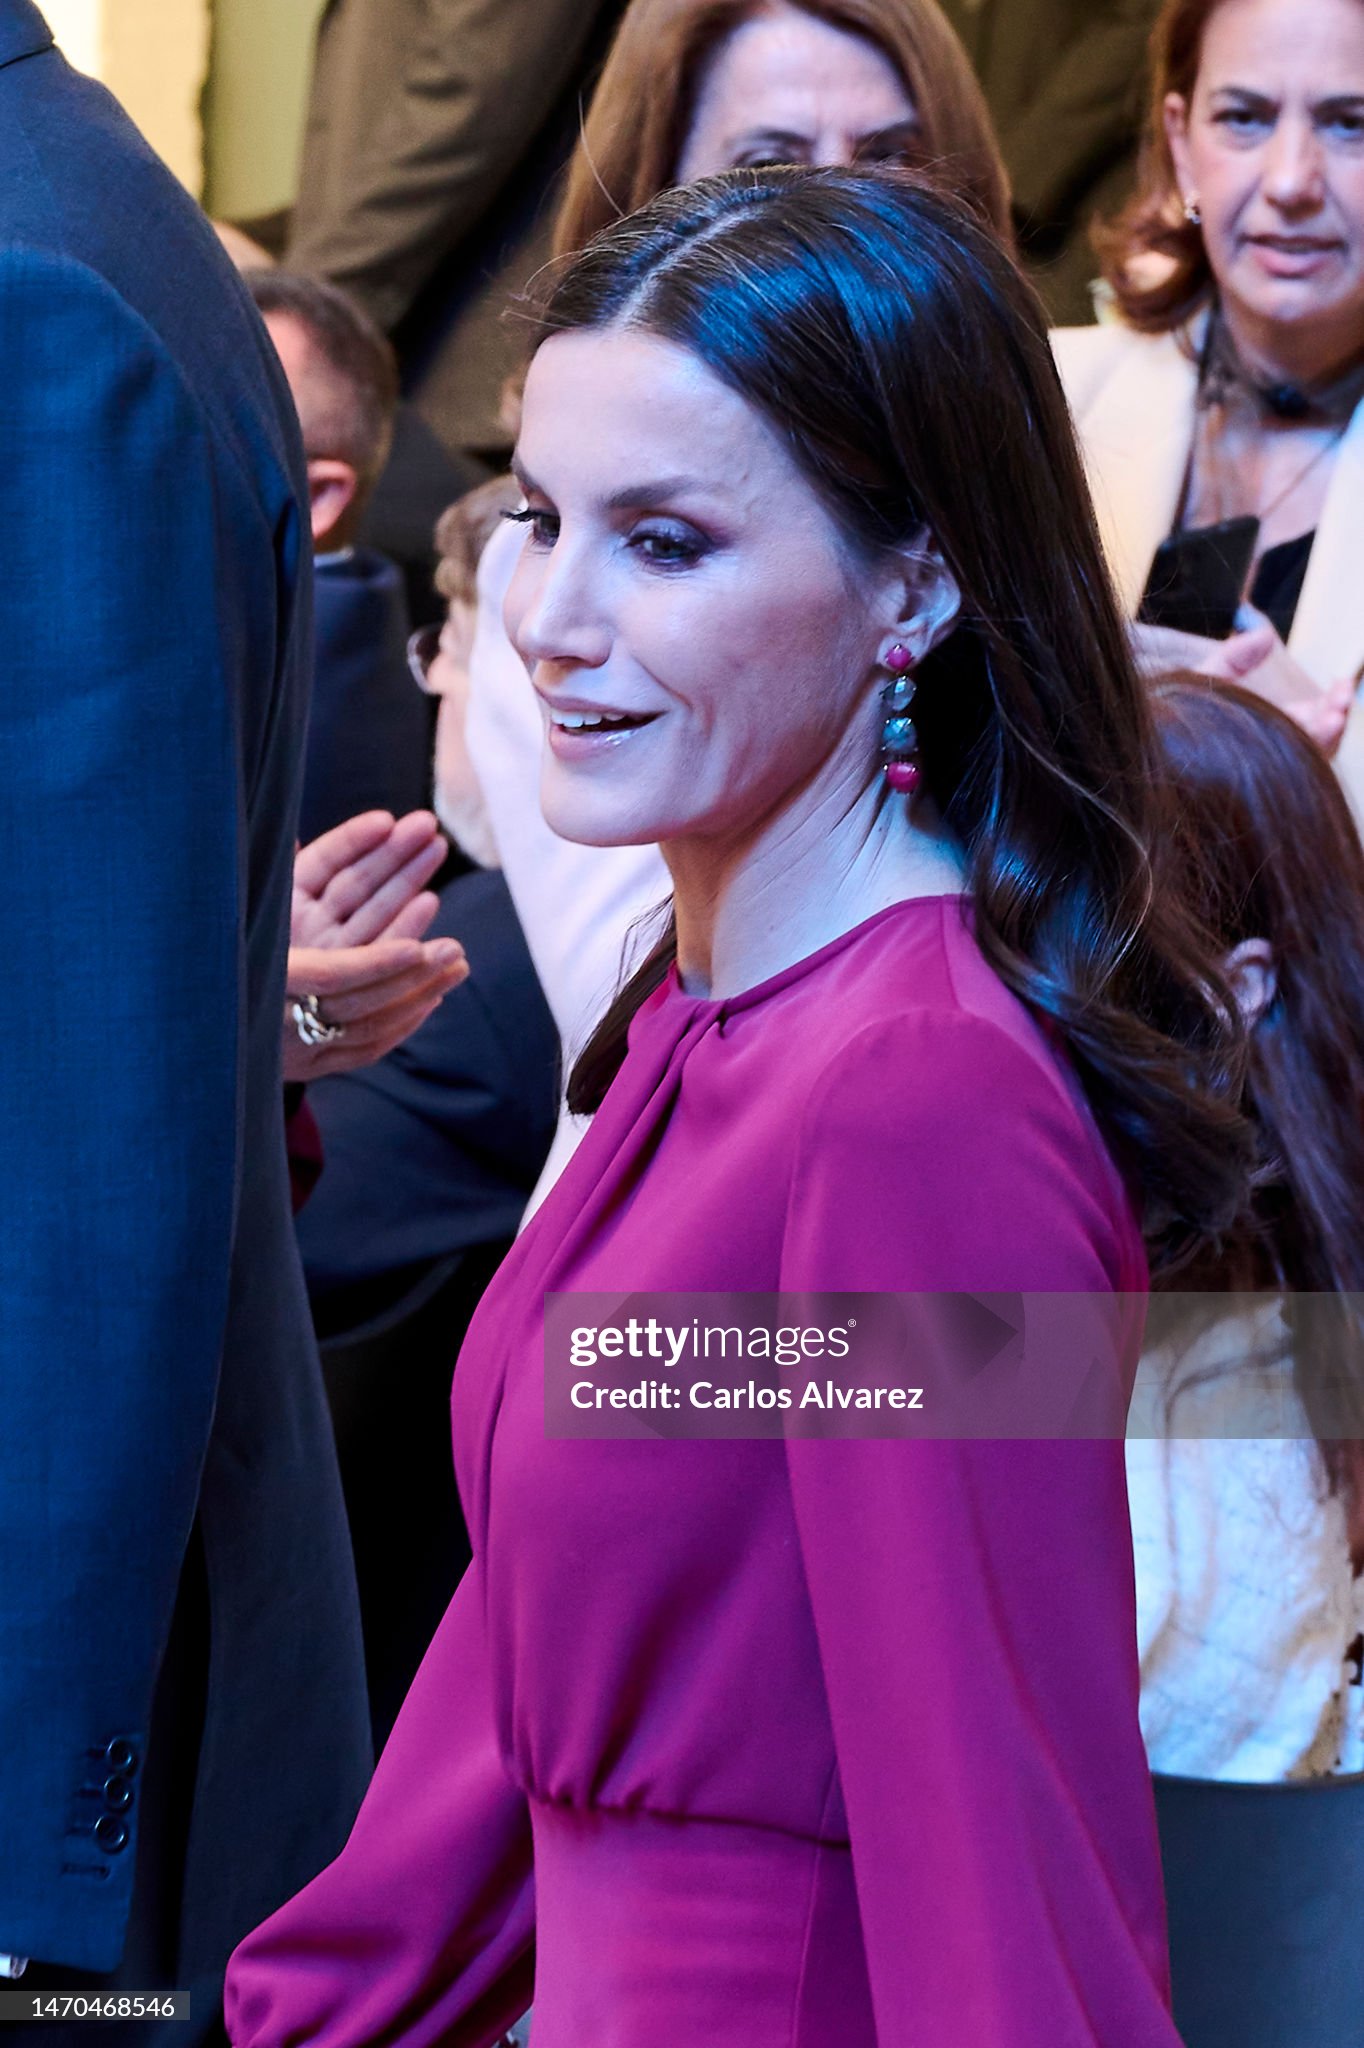 spanish-royals-attend-the-investigation-national-awards-2022-in-alicante.jpg